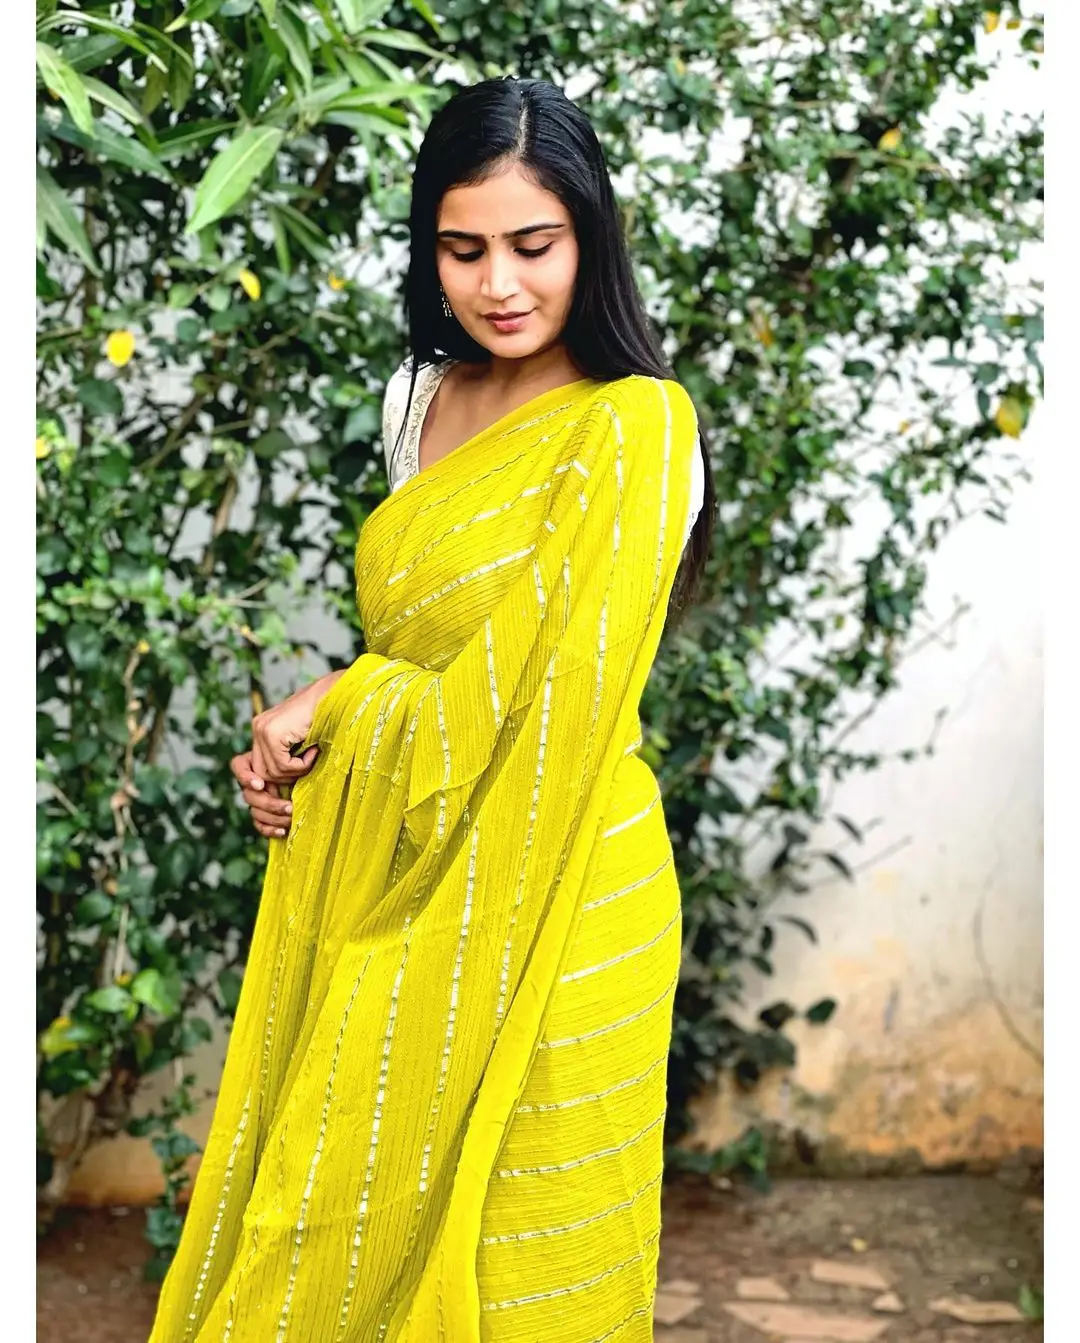 INDIAN GIRL KAVYA SHREE IN TRADITIONAL GREEN SAREE WHITE BLOUSE 4